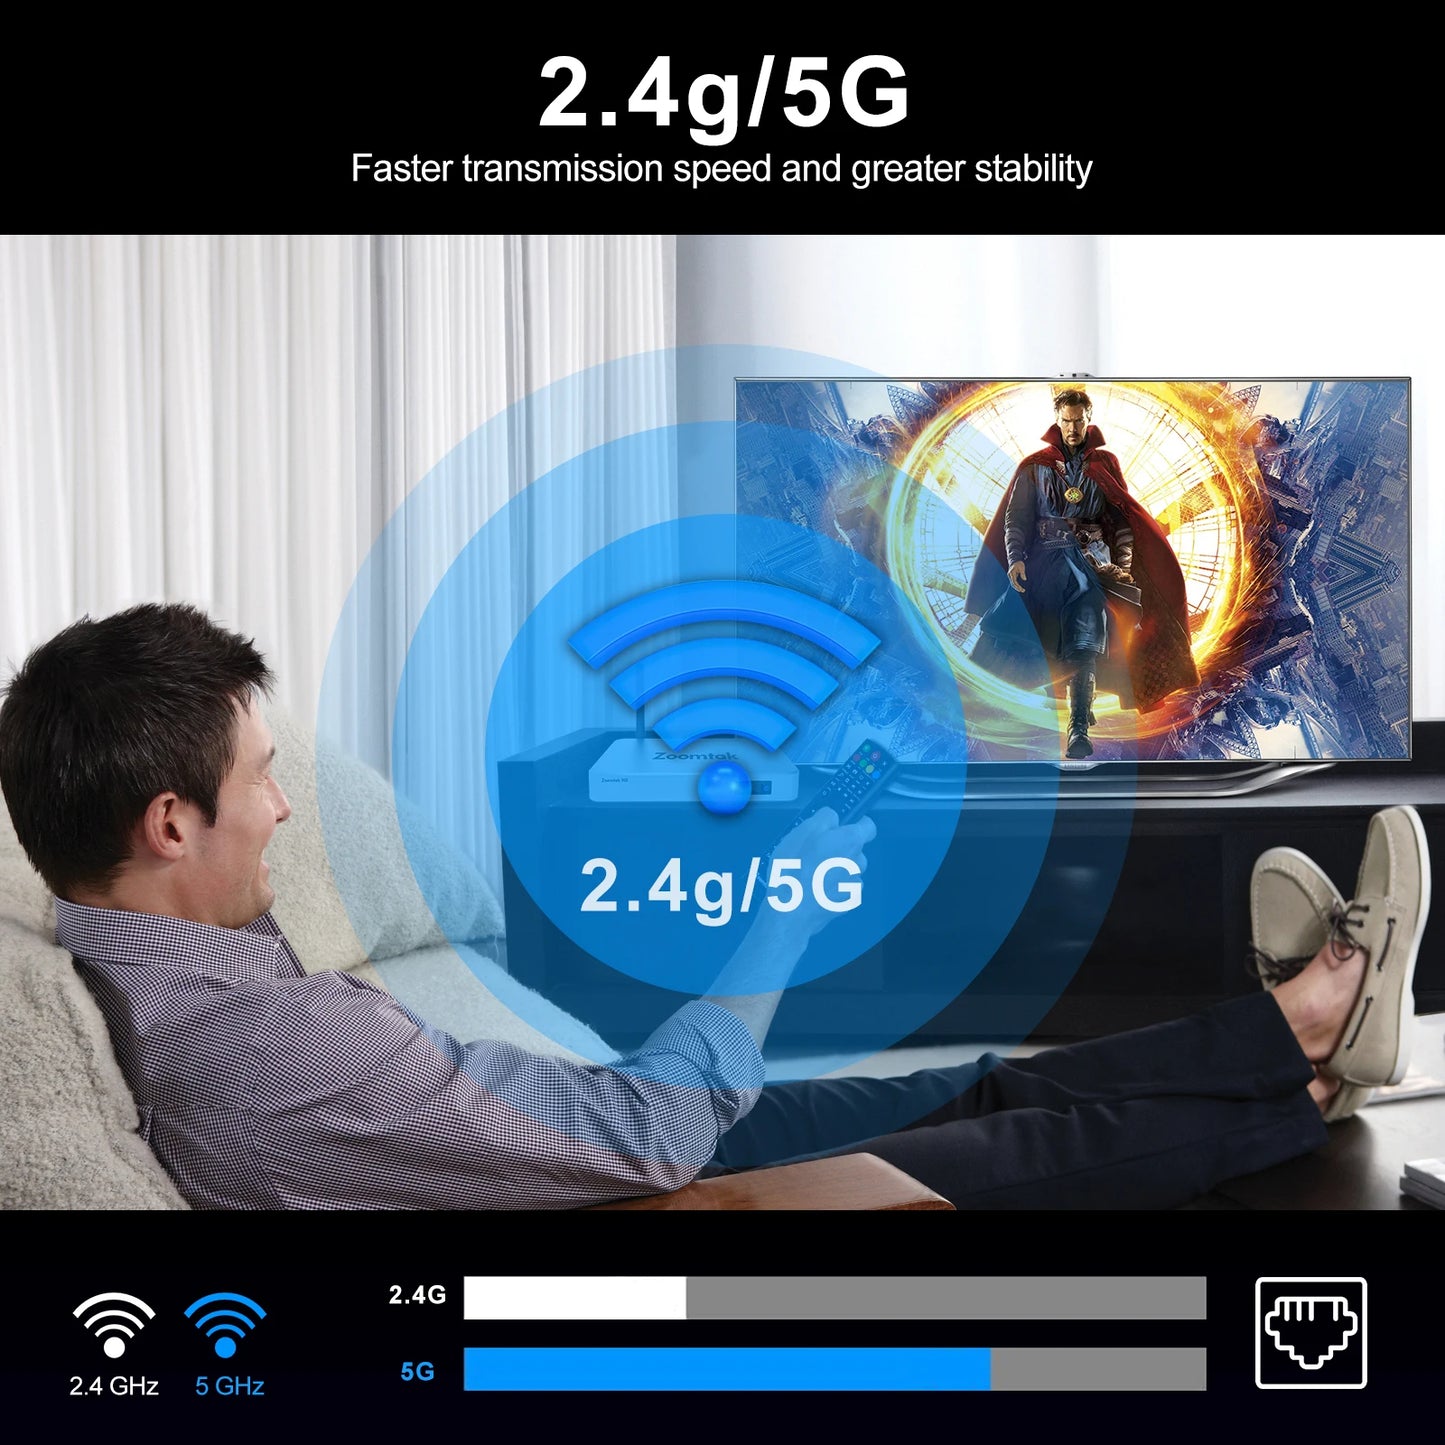 New X88 MINI 13 TV Box Android 13 8K Dual Band Wifi Video Output 4K TV Box - A1Smartstore®